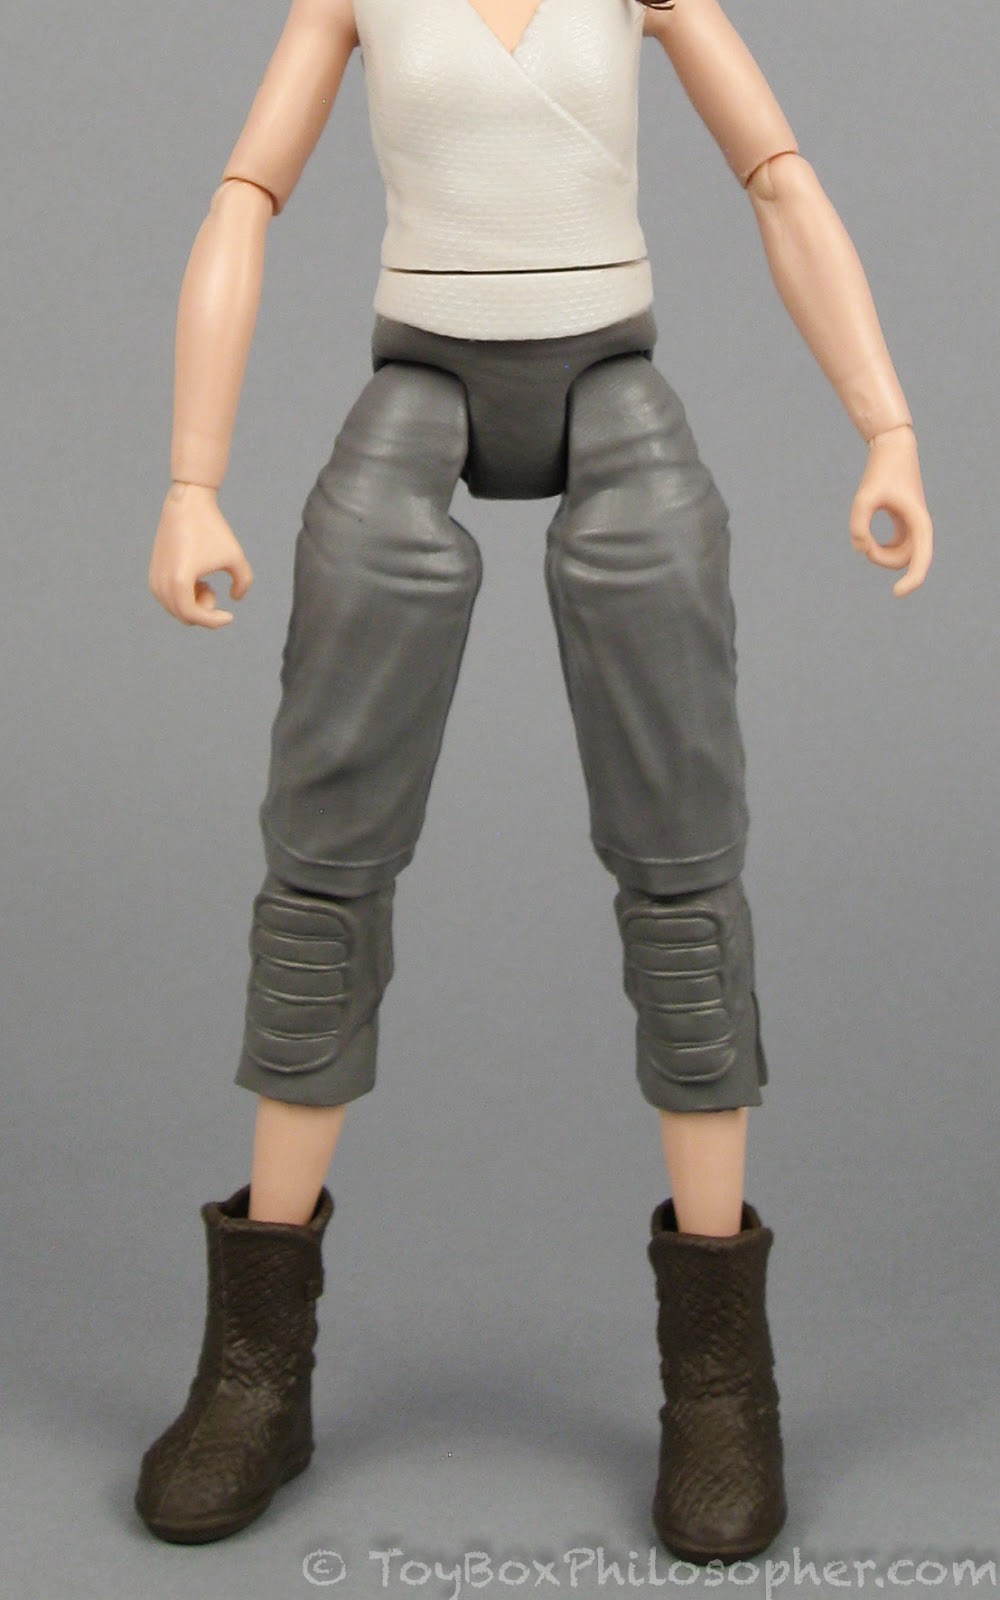 Forces of Destiny Rey and Leia by Hasbro | The Toy Box Philosopher